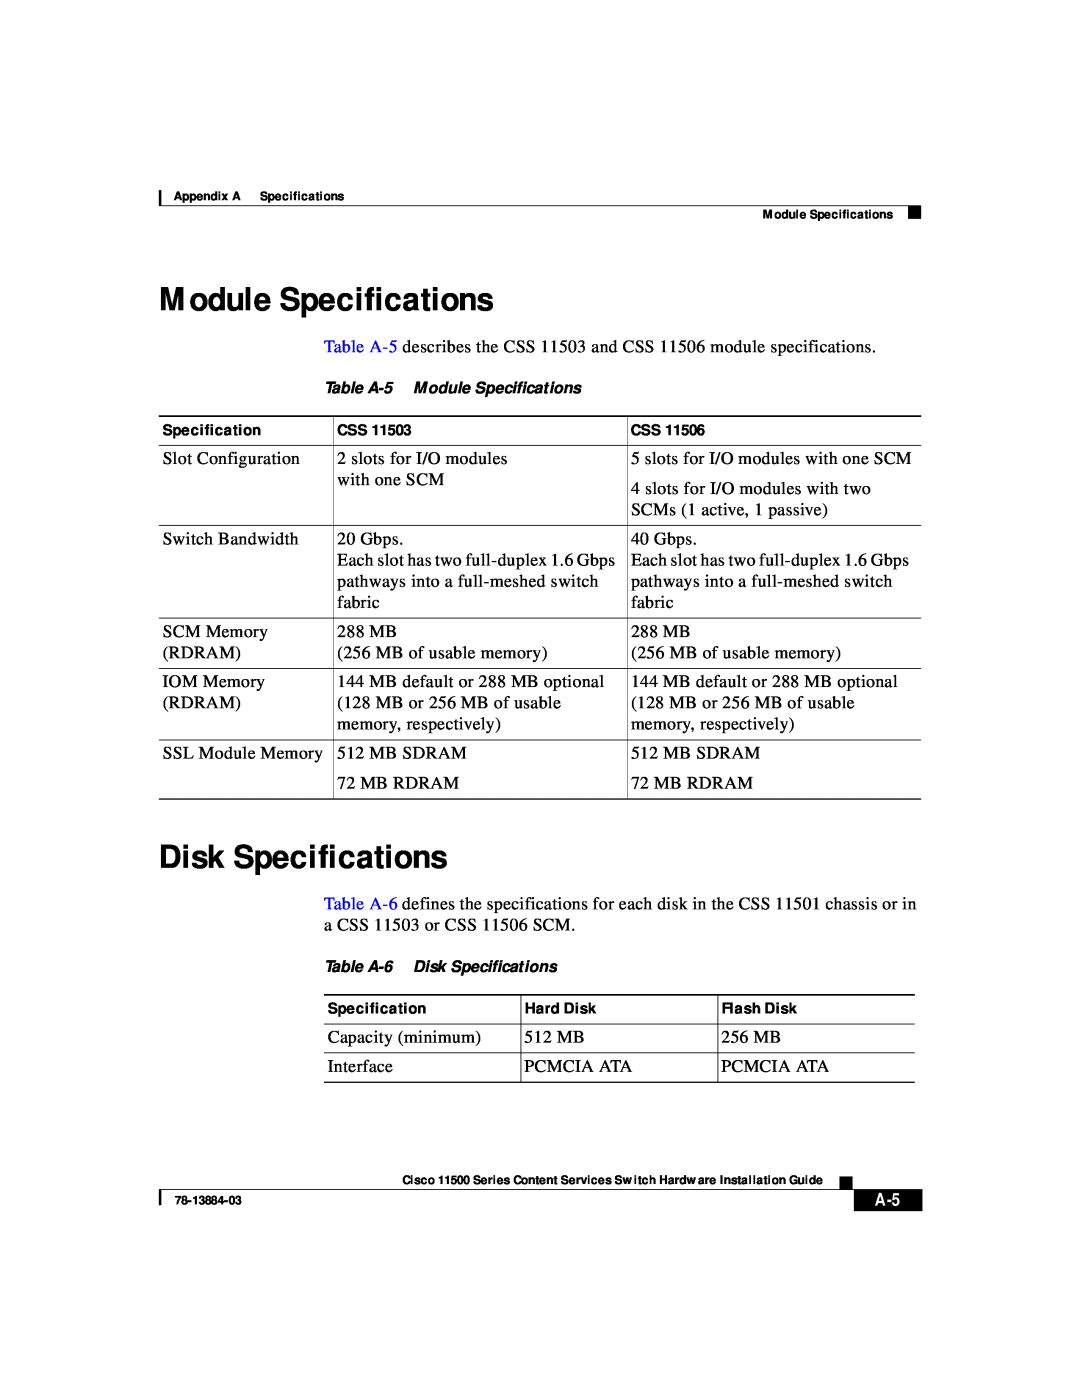 Cisco Systems 11500 Series manual Module Specifications, Disk Specifications 